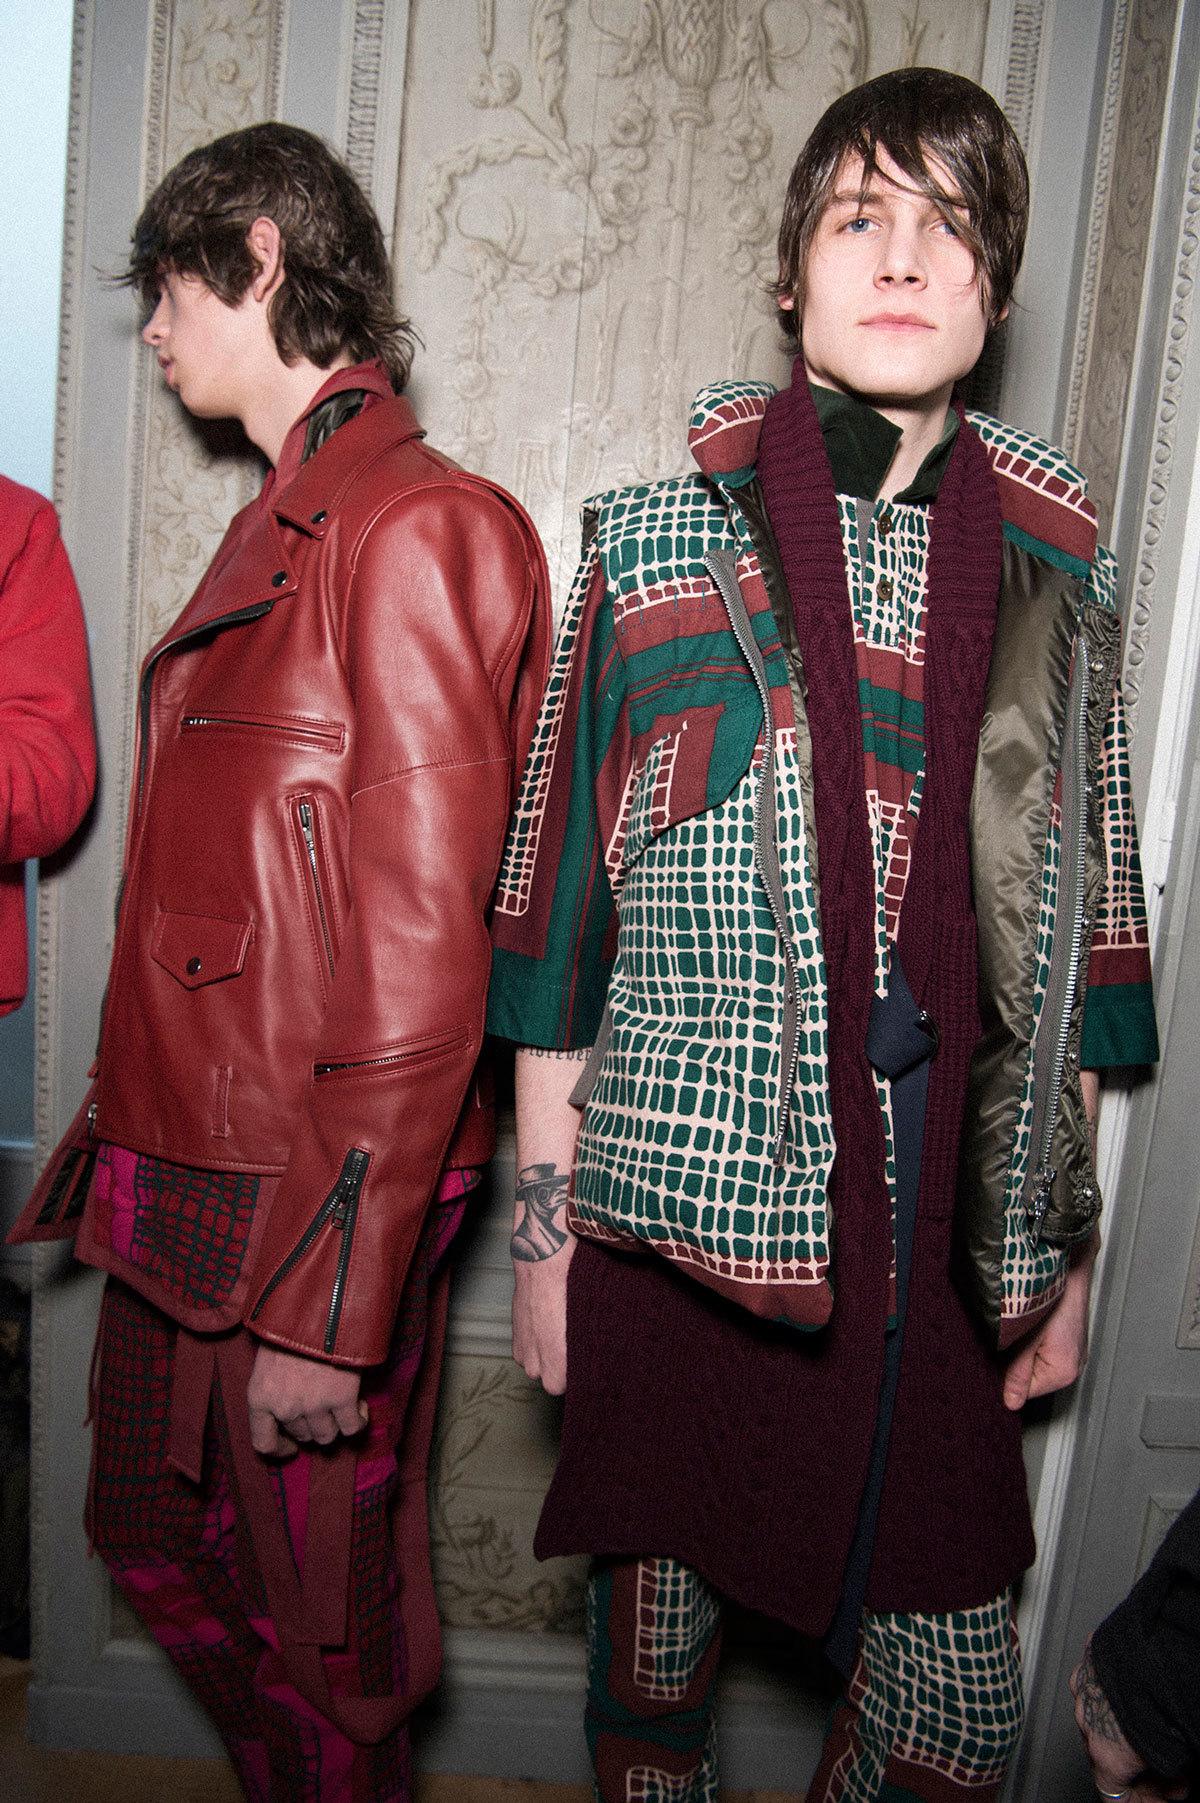 sacai shows lust for life with fall/winter 16 | look | i-D